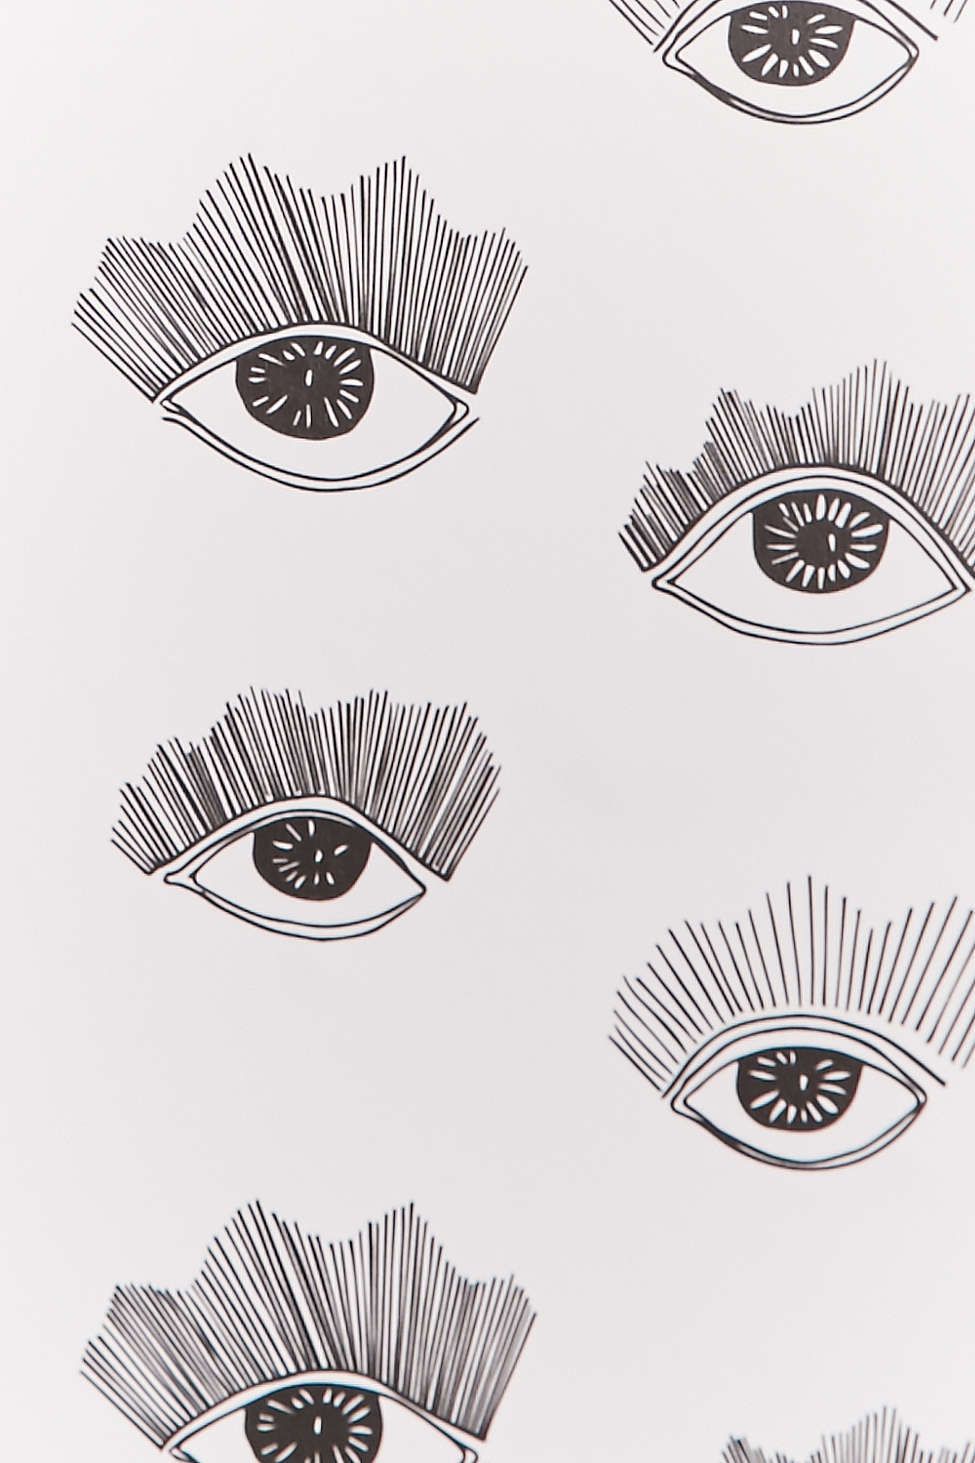 Chasing Paper And Kate Zaremba Bright Eyes Removable Wallpaper. Eye illustration, Paper, Wallpaper